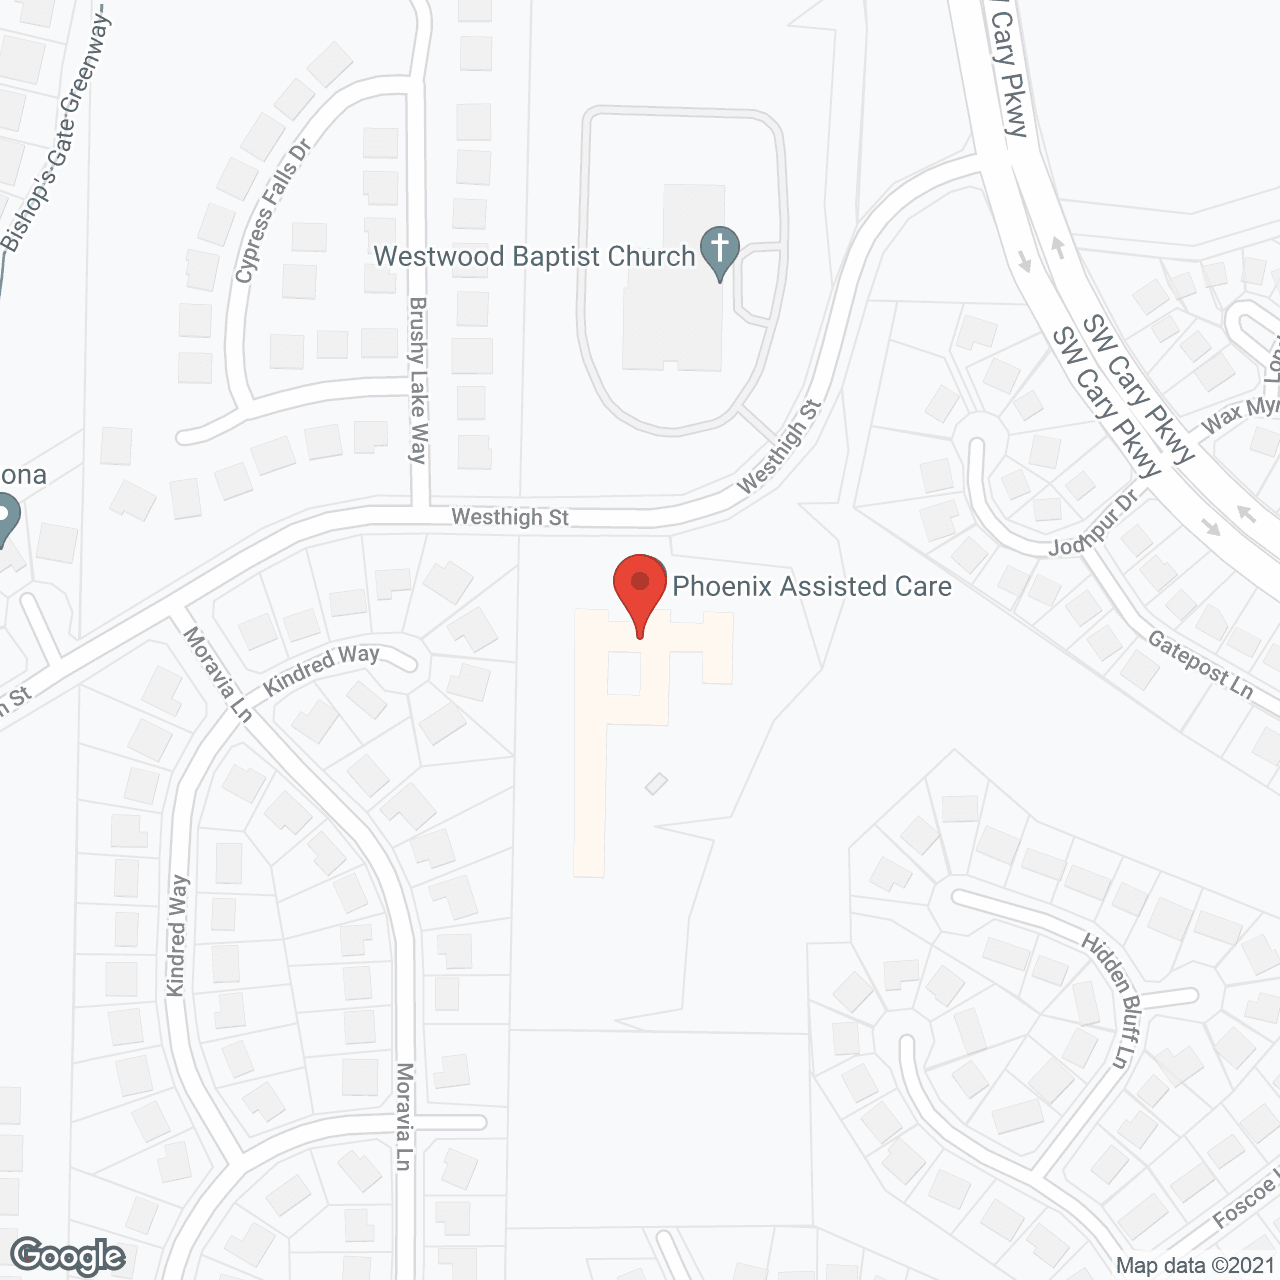 Phoenix Assisted Care in google map